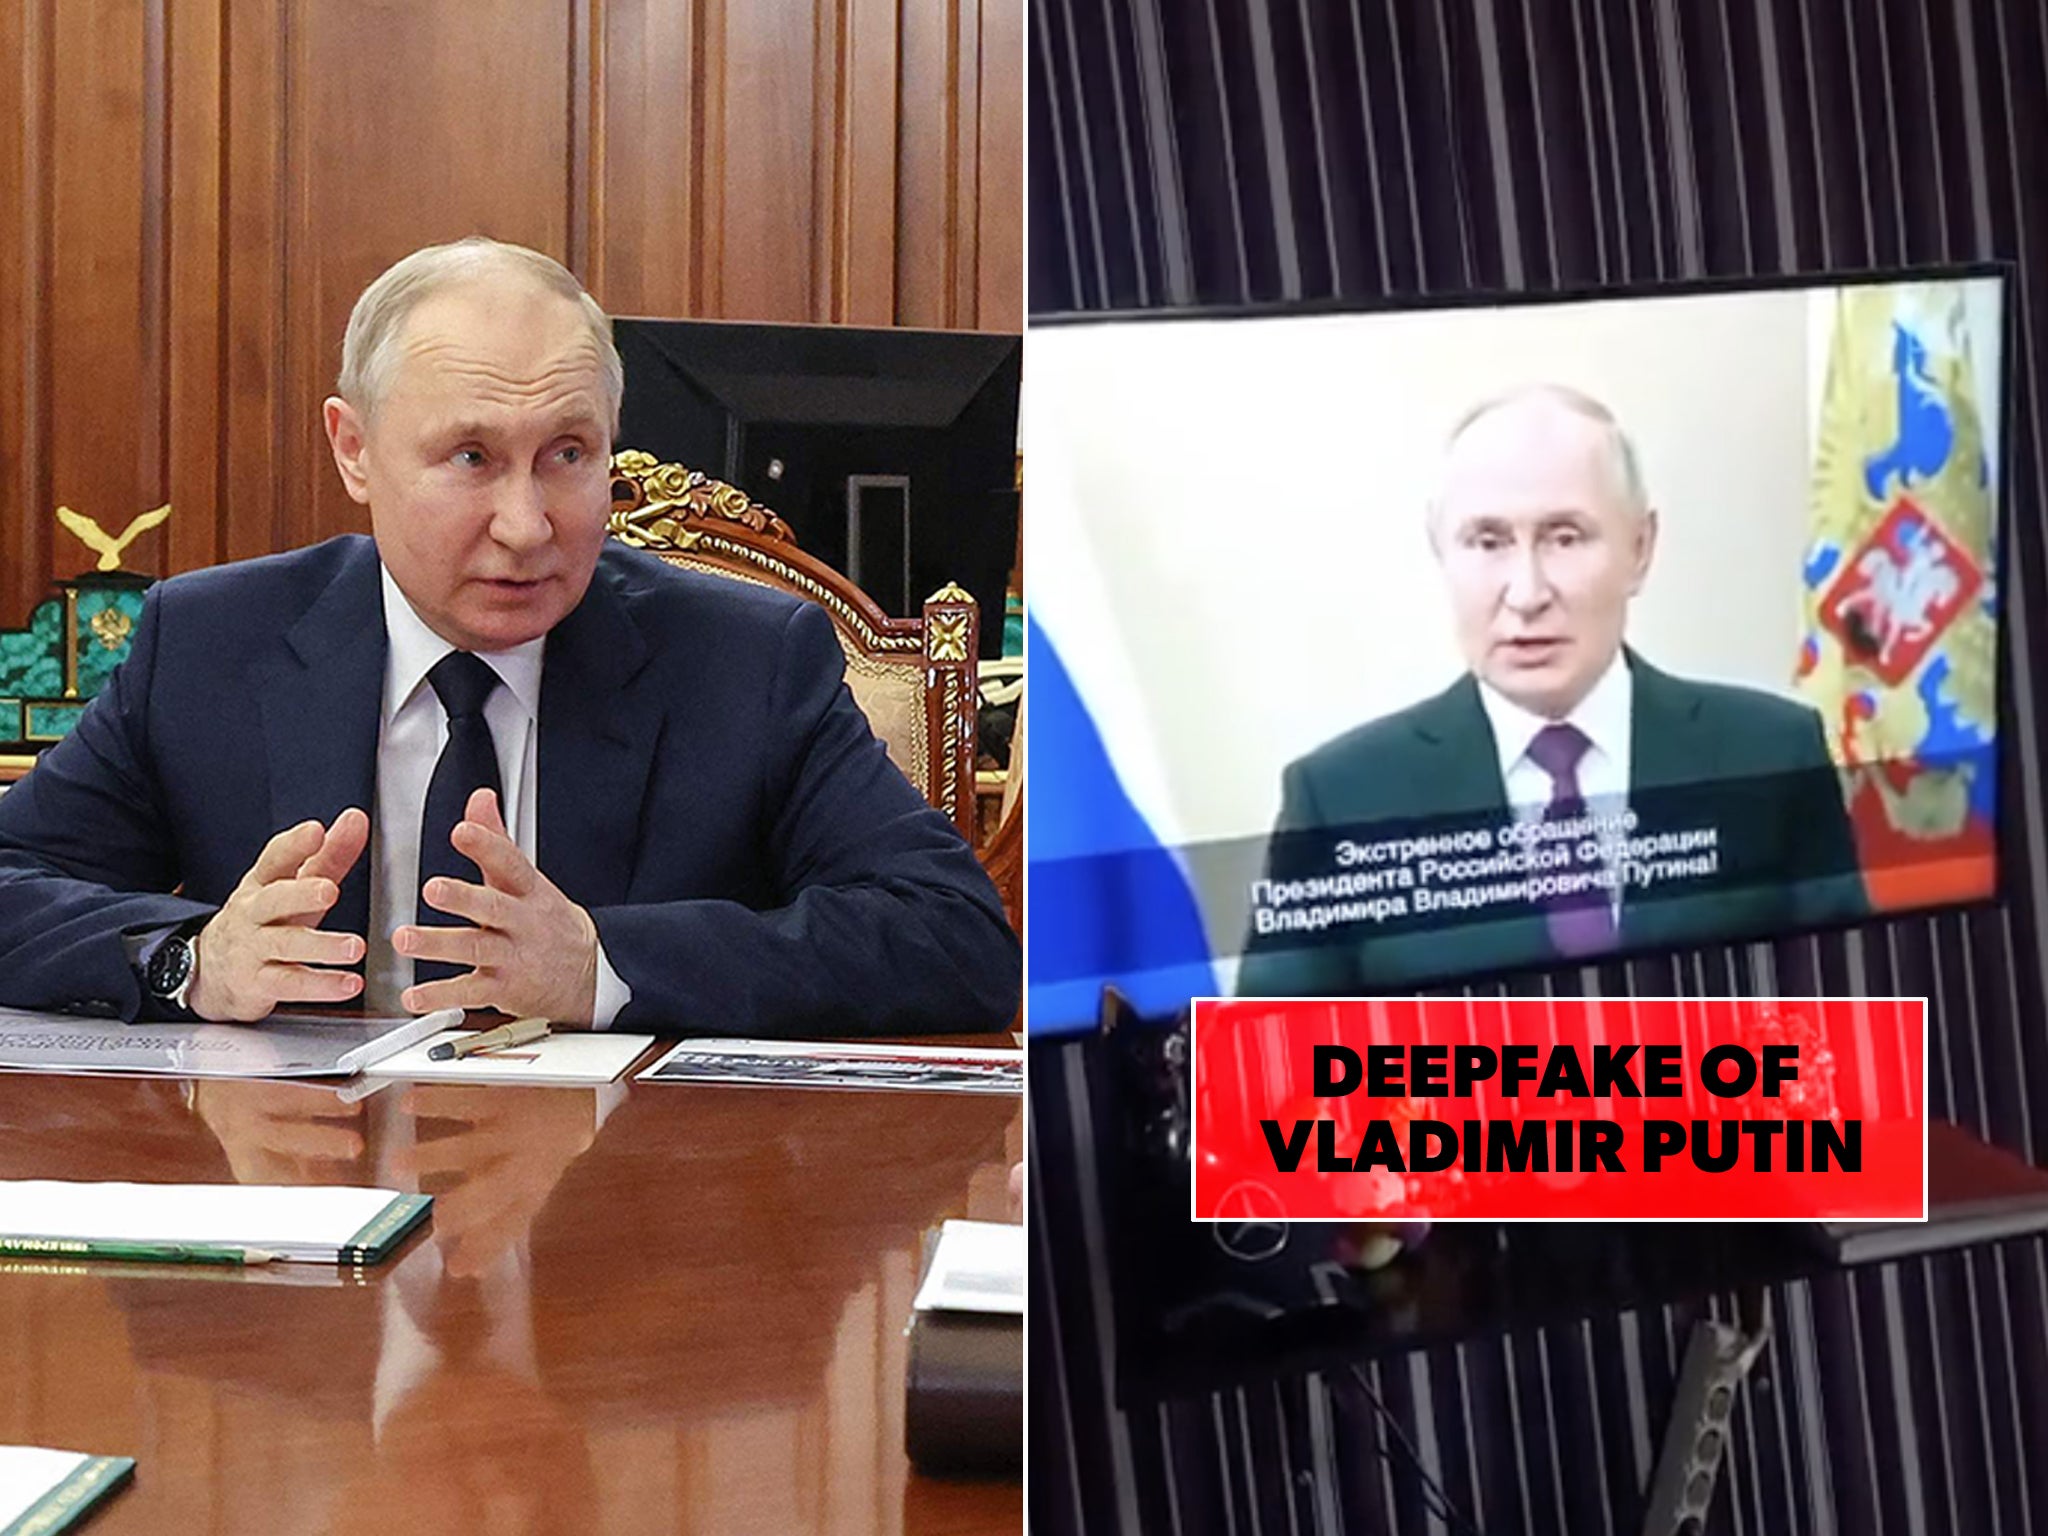 Vladimir Putin in a meeting and a deepfake broadcast of him (text edit added by The Independent to indicate deepfake)